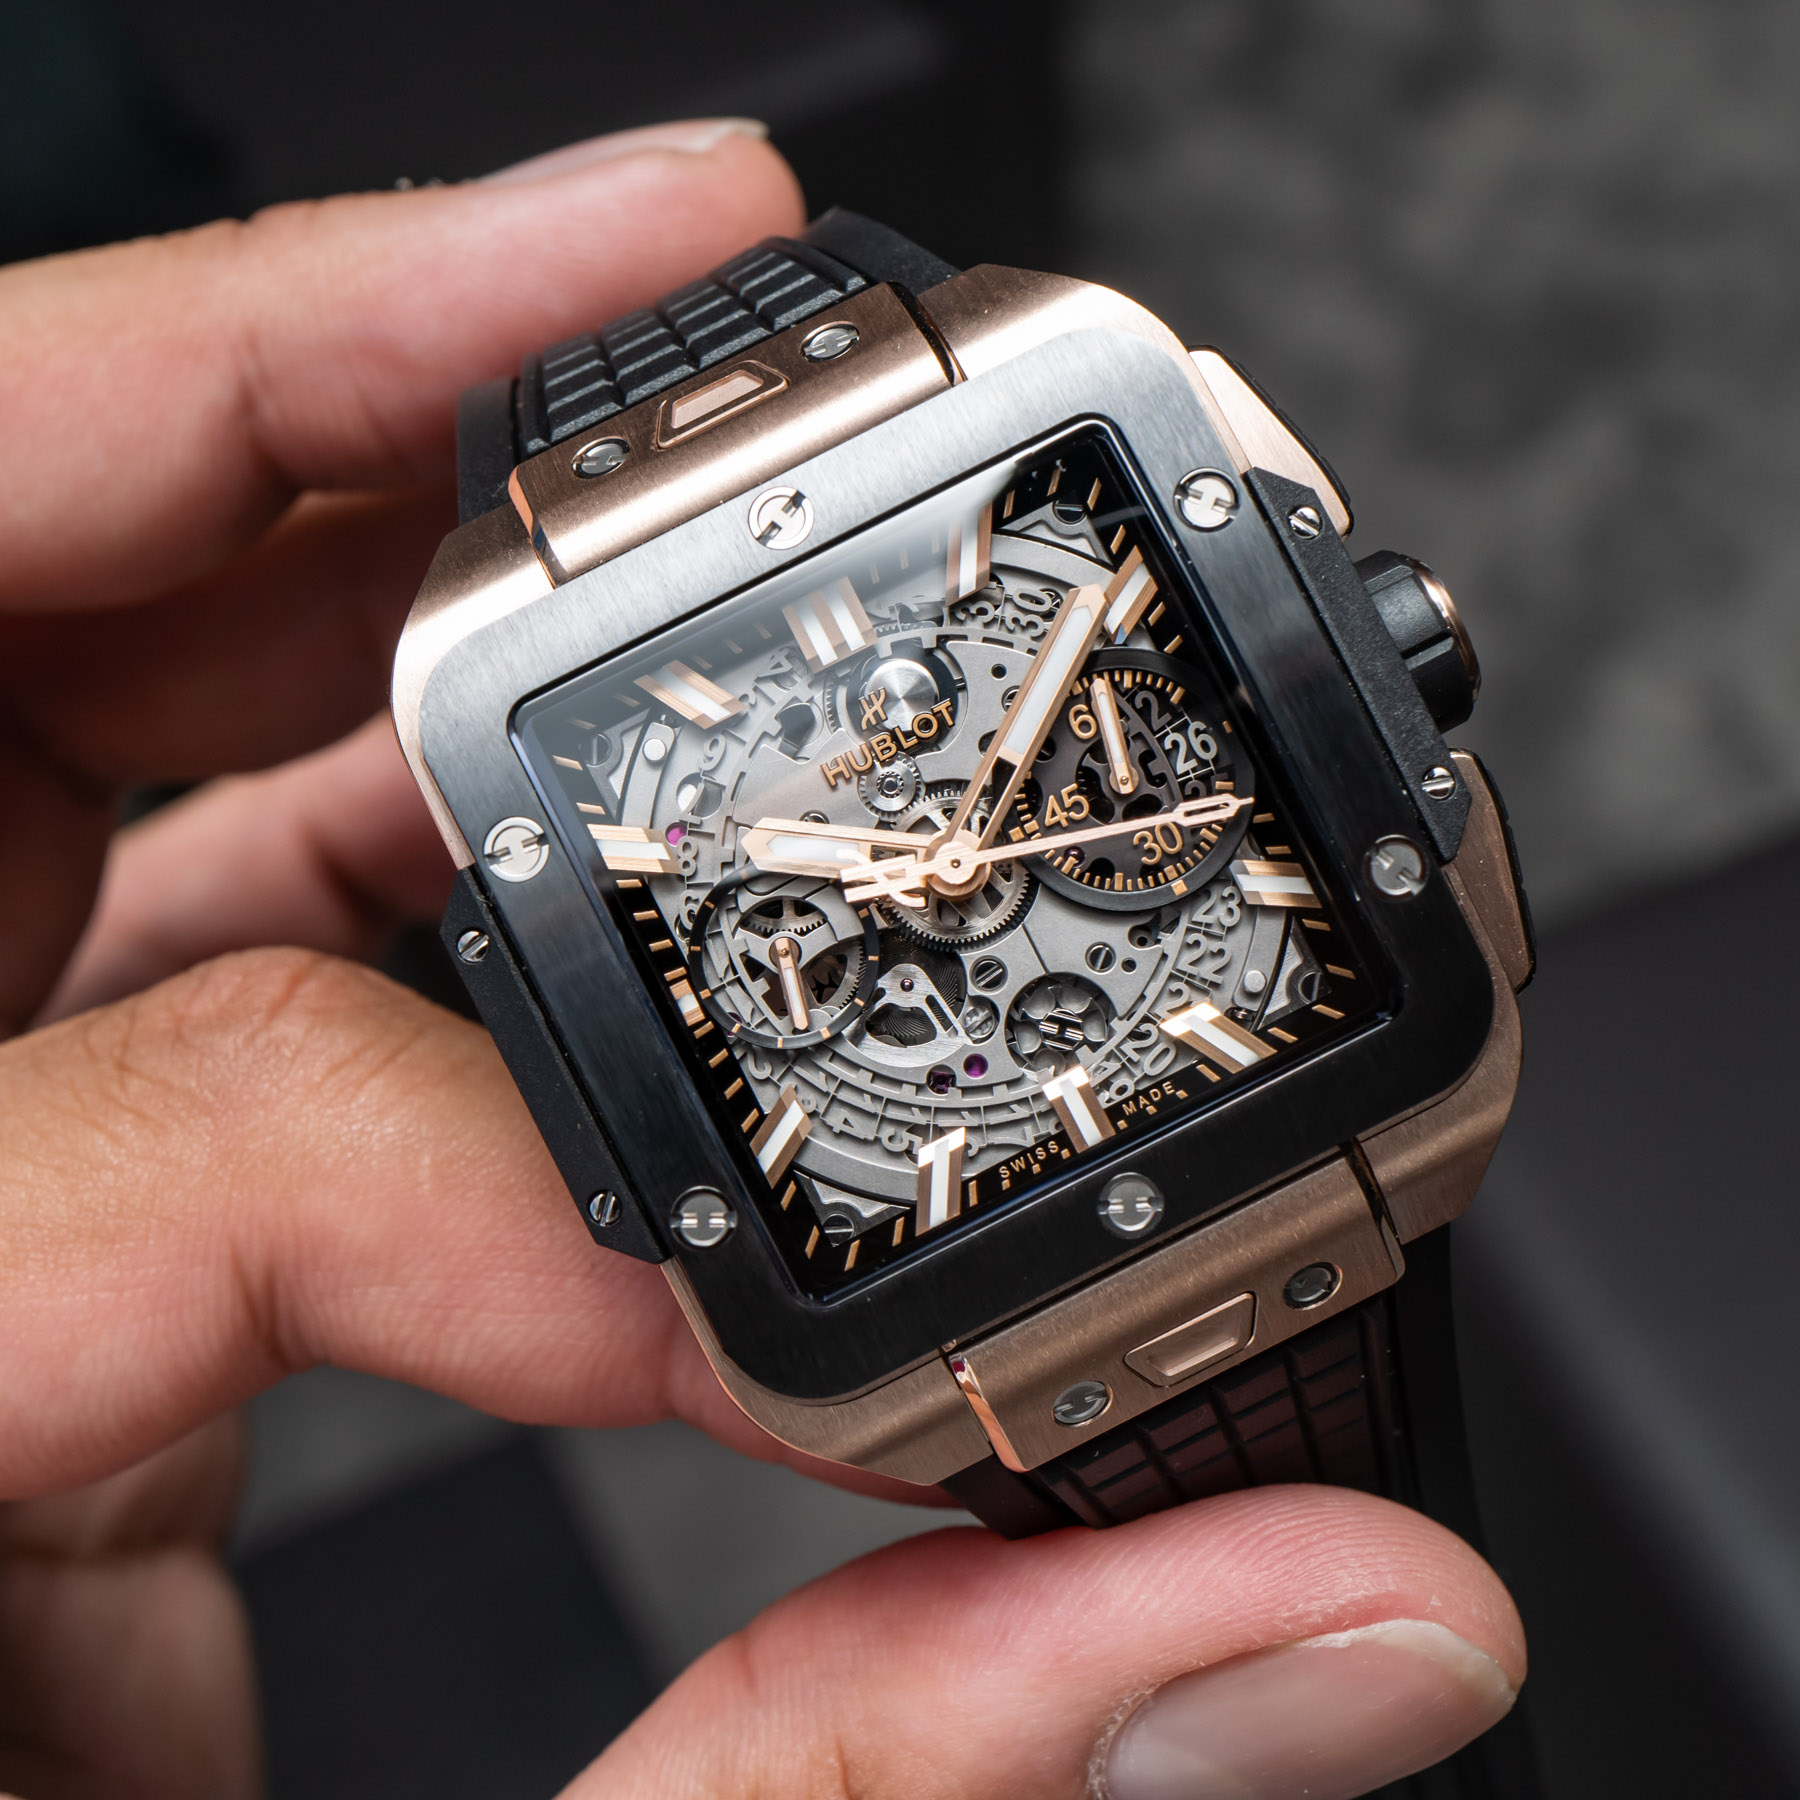 Buy the latest luxury watches from Hublot/Big Bang now!